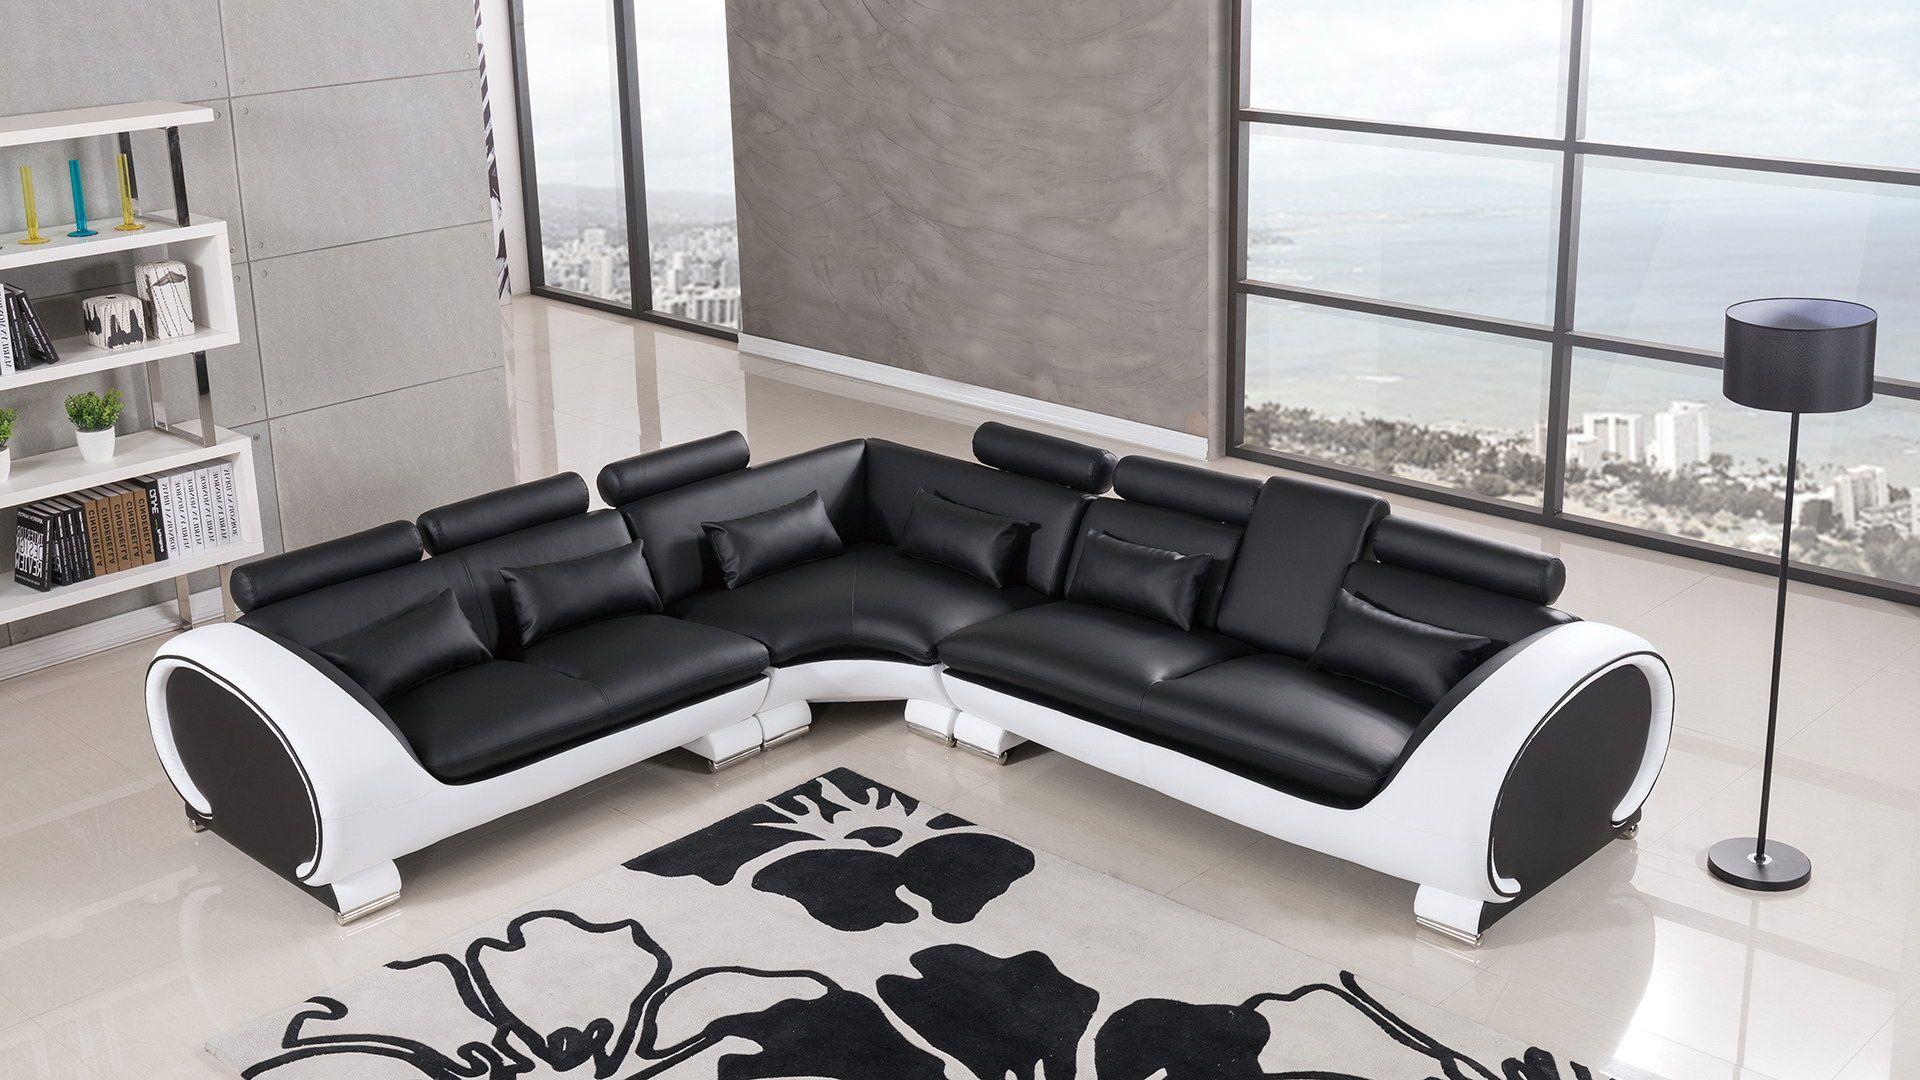 Contemporary, Modern Sectional Sofa AE-LD801-BK.W AE-LD801L-BK.W in White, Black Bonded Leather